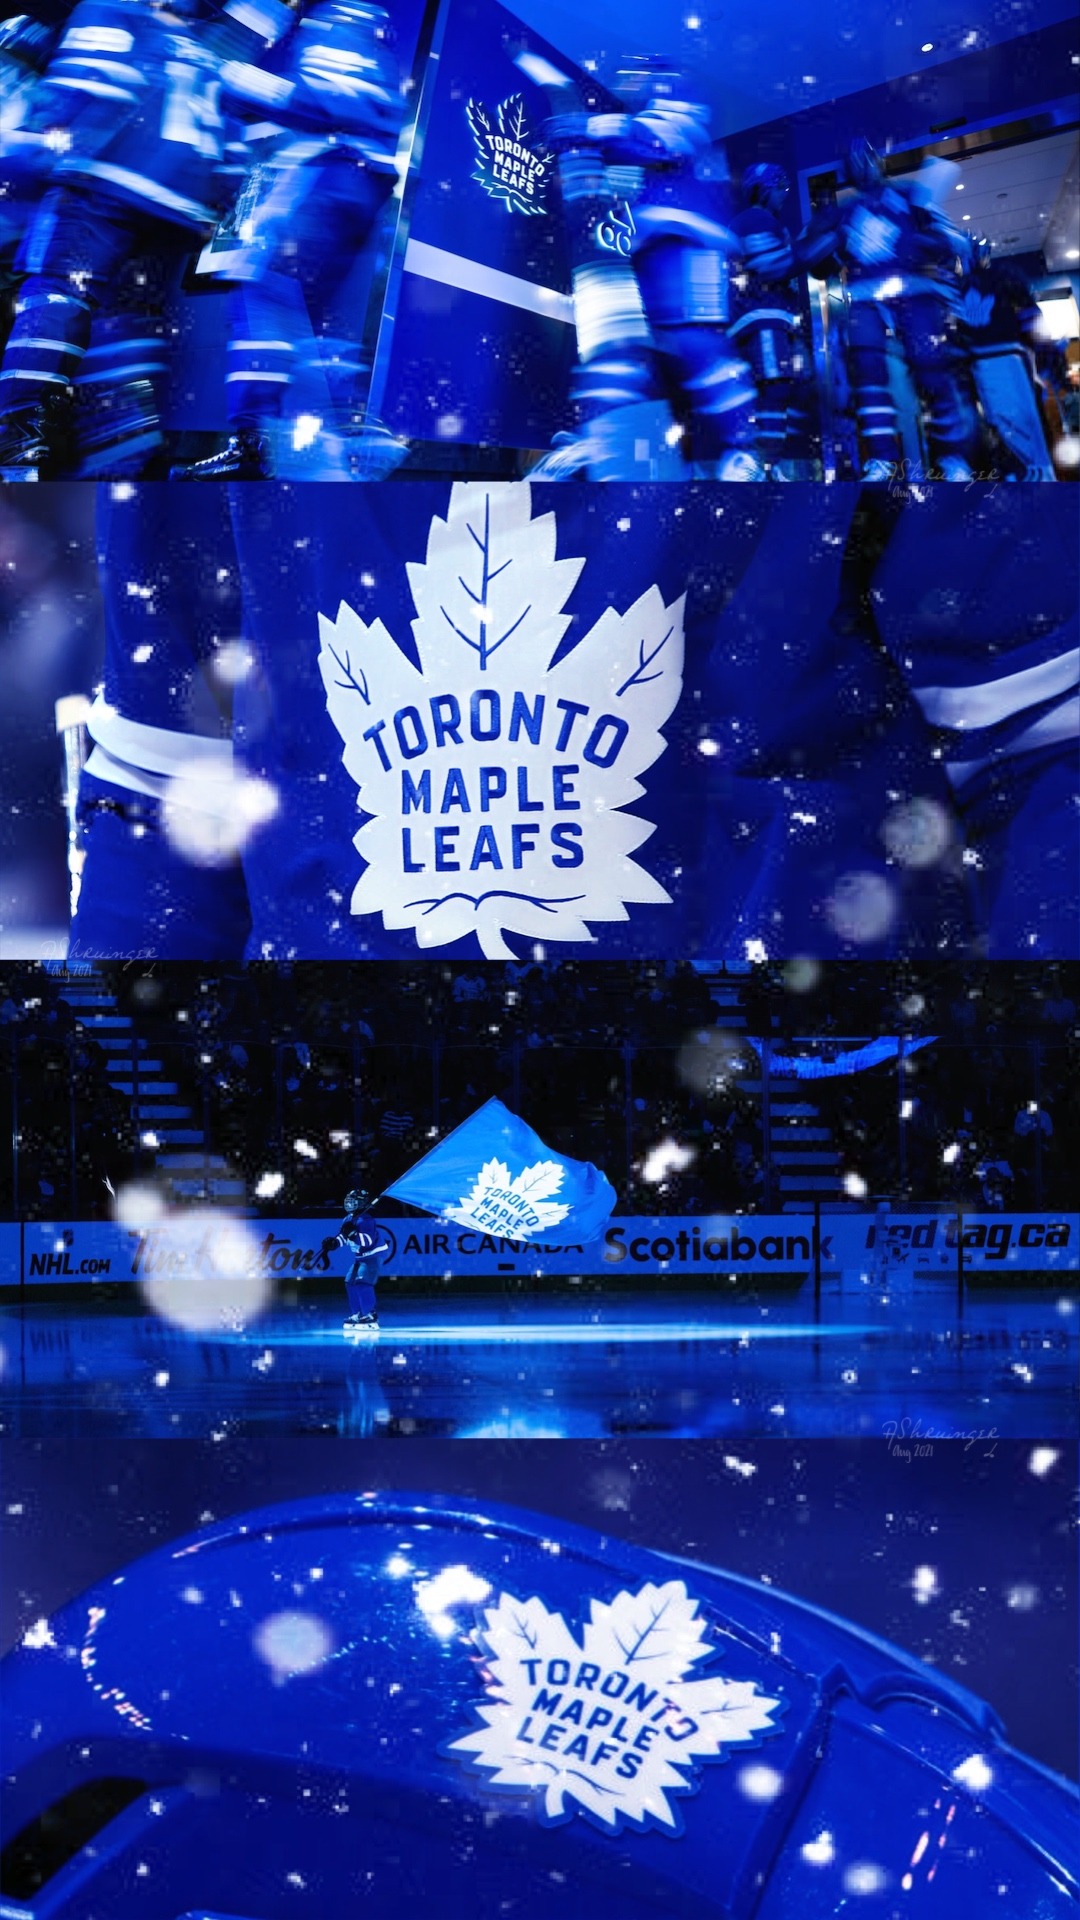 Toronto Maple Leafs Wallpapers